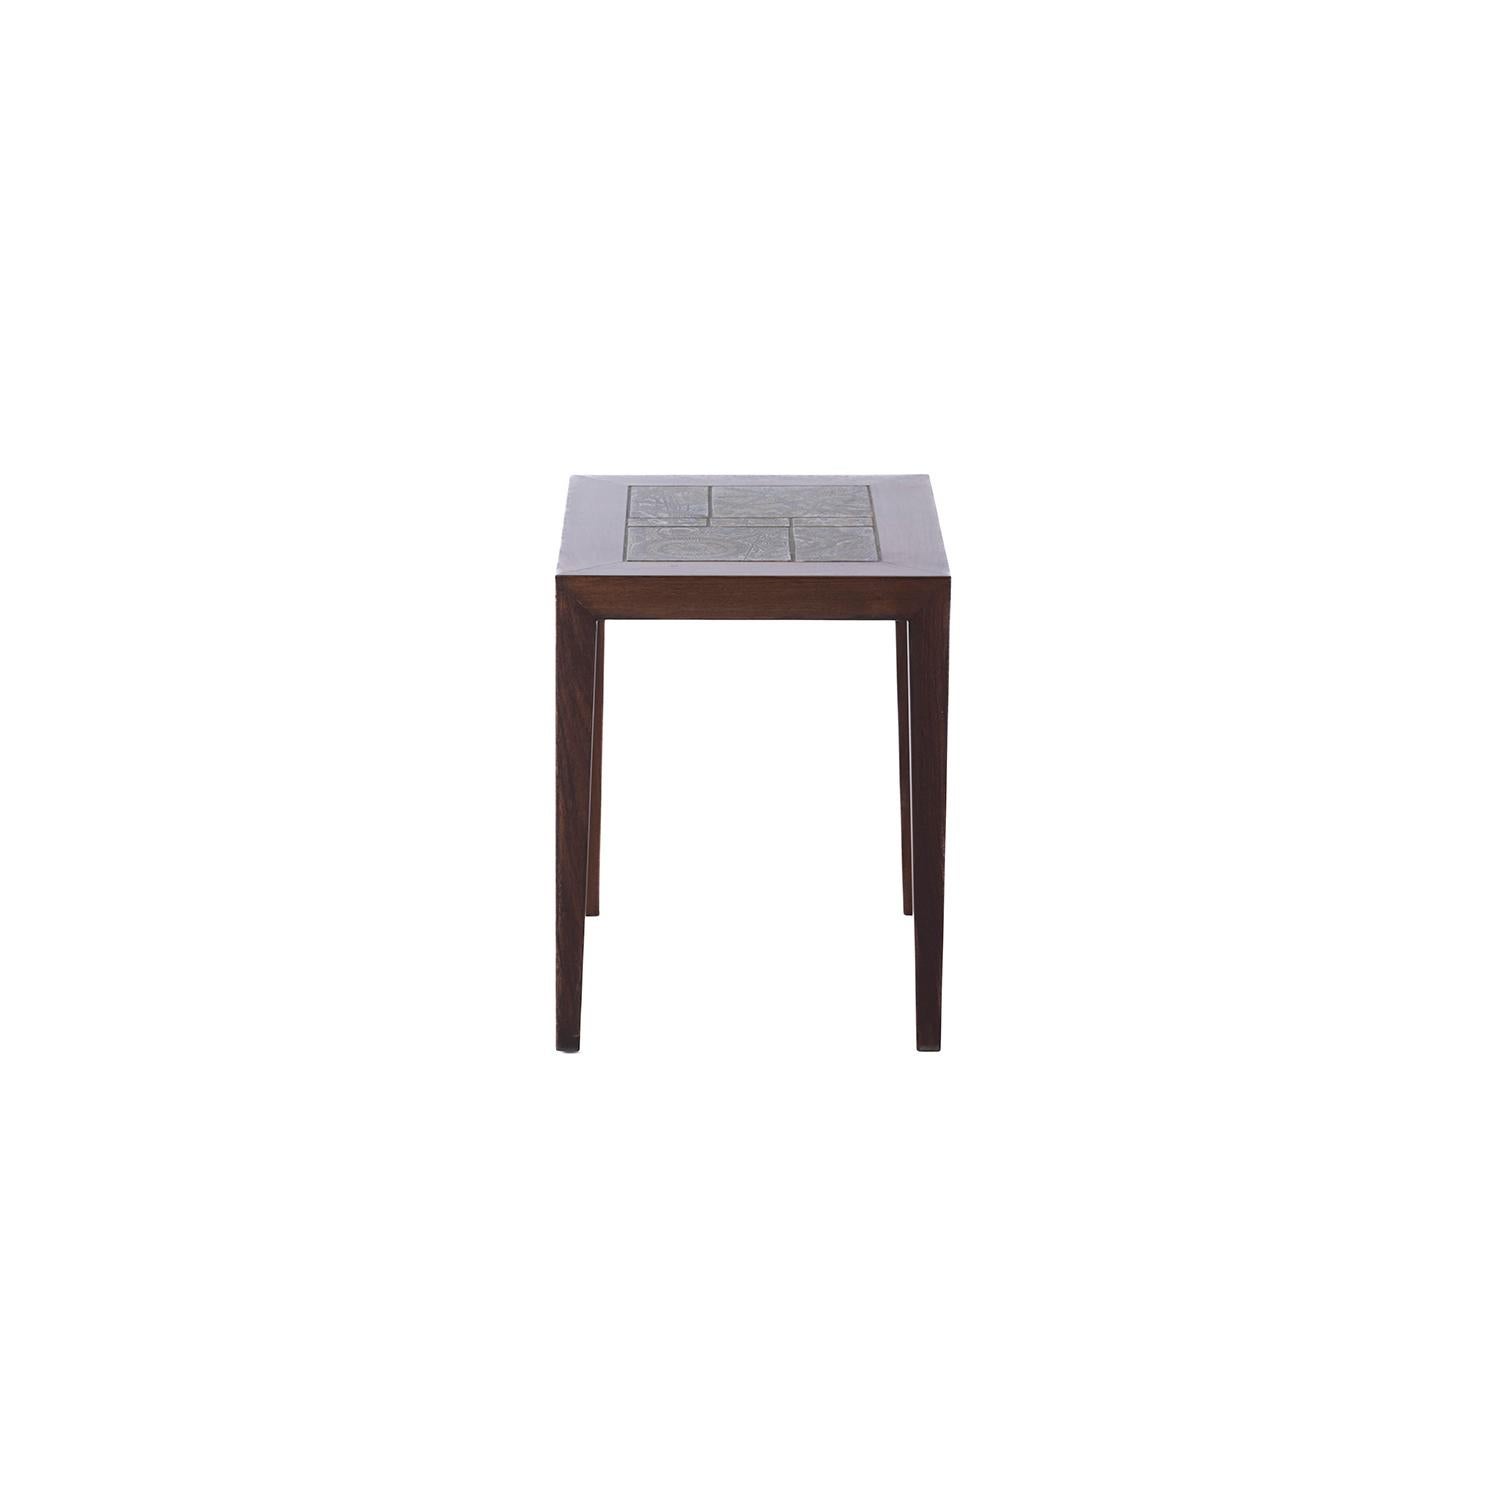 Danish Modern Severin Hansen Rosewood Occasional Table In Excellent Condition For Sale In Minneapolis, MN